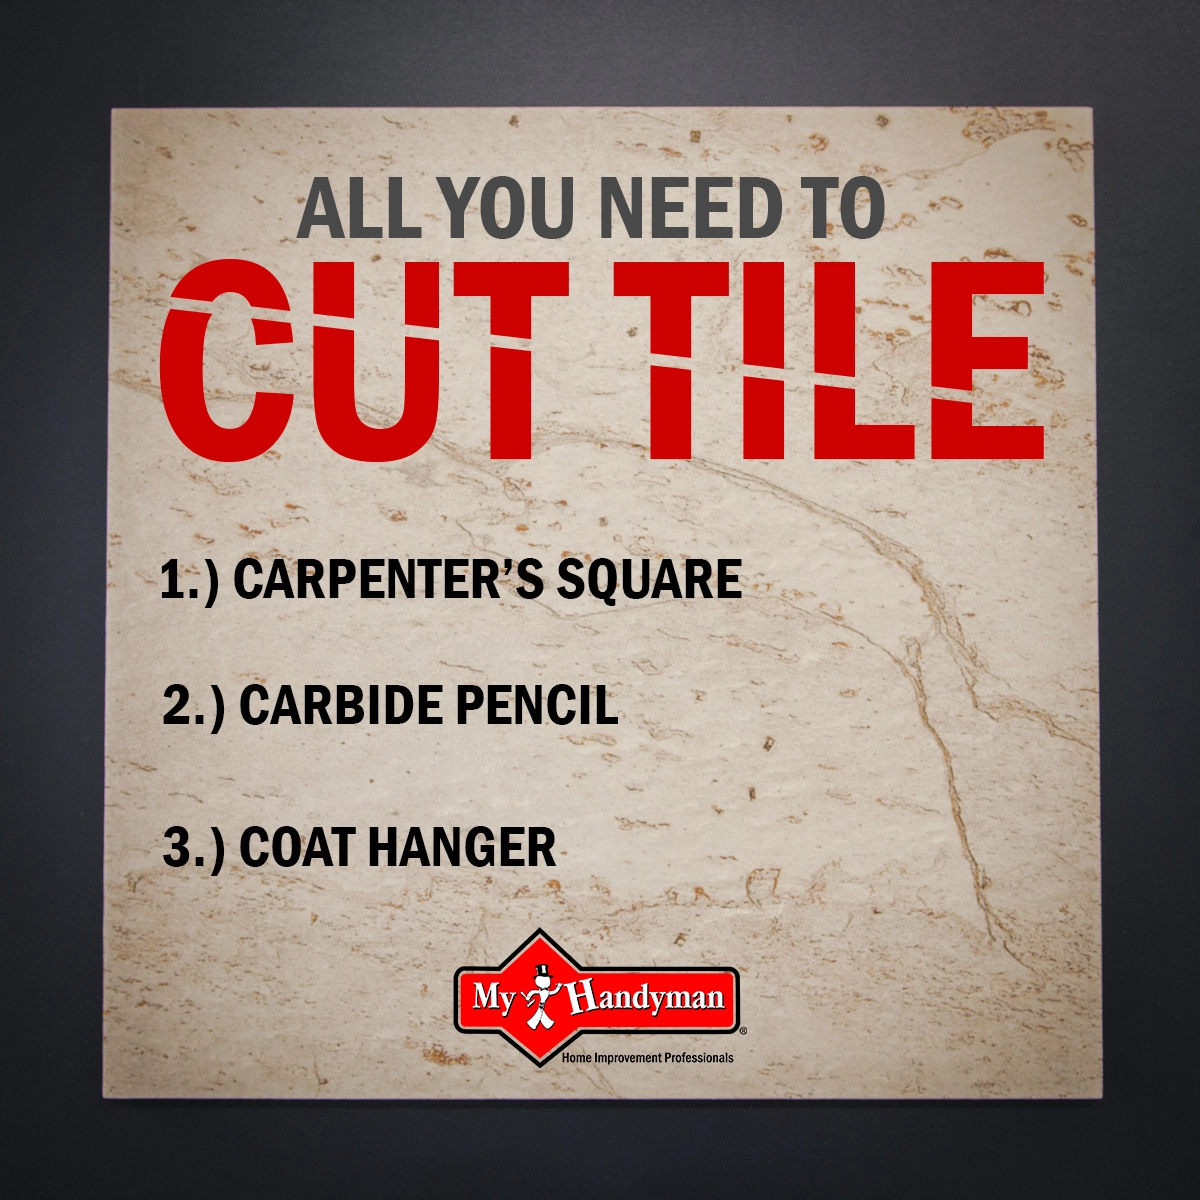 List of everything you need to cut tile on a tile, Mr. Handyman icon on the bottom.